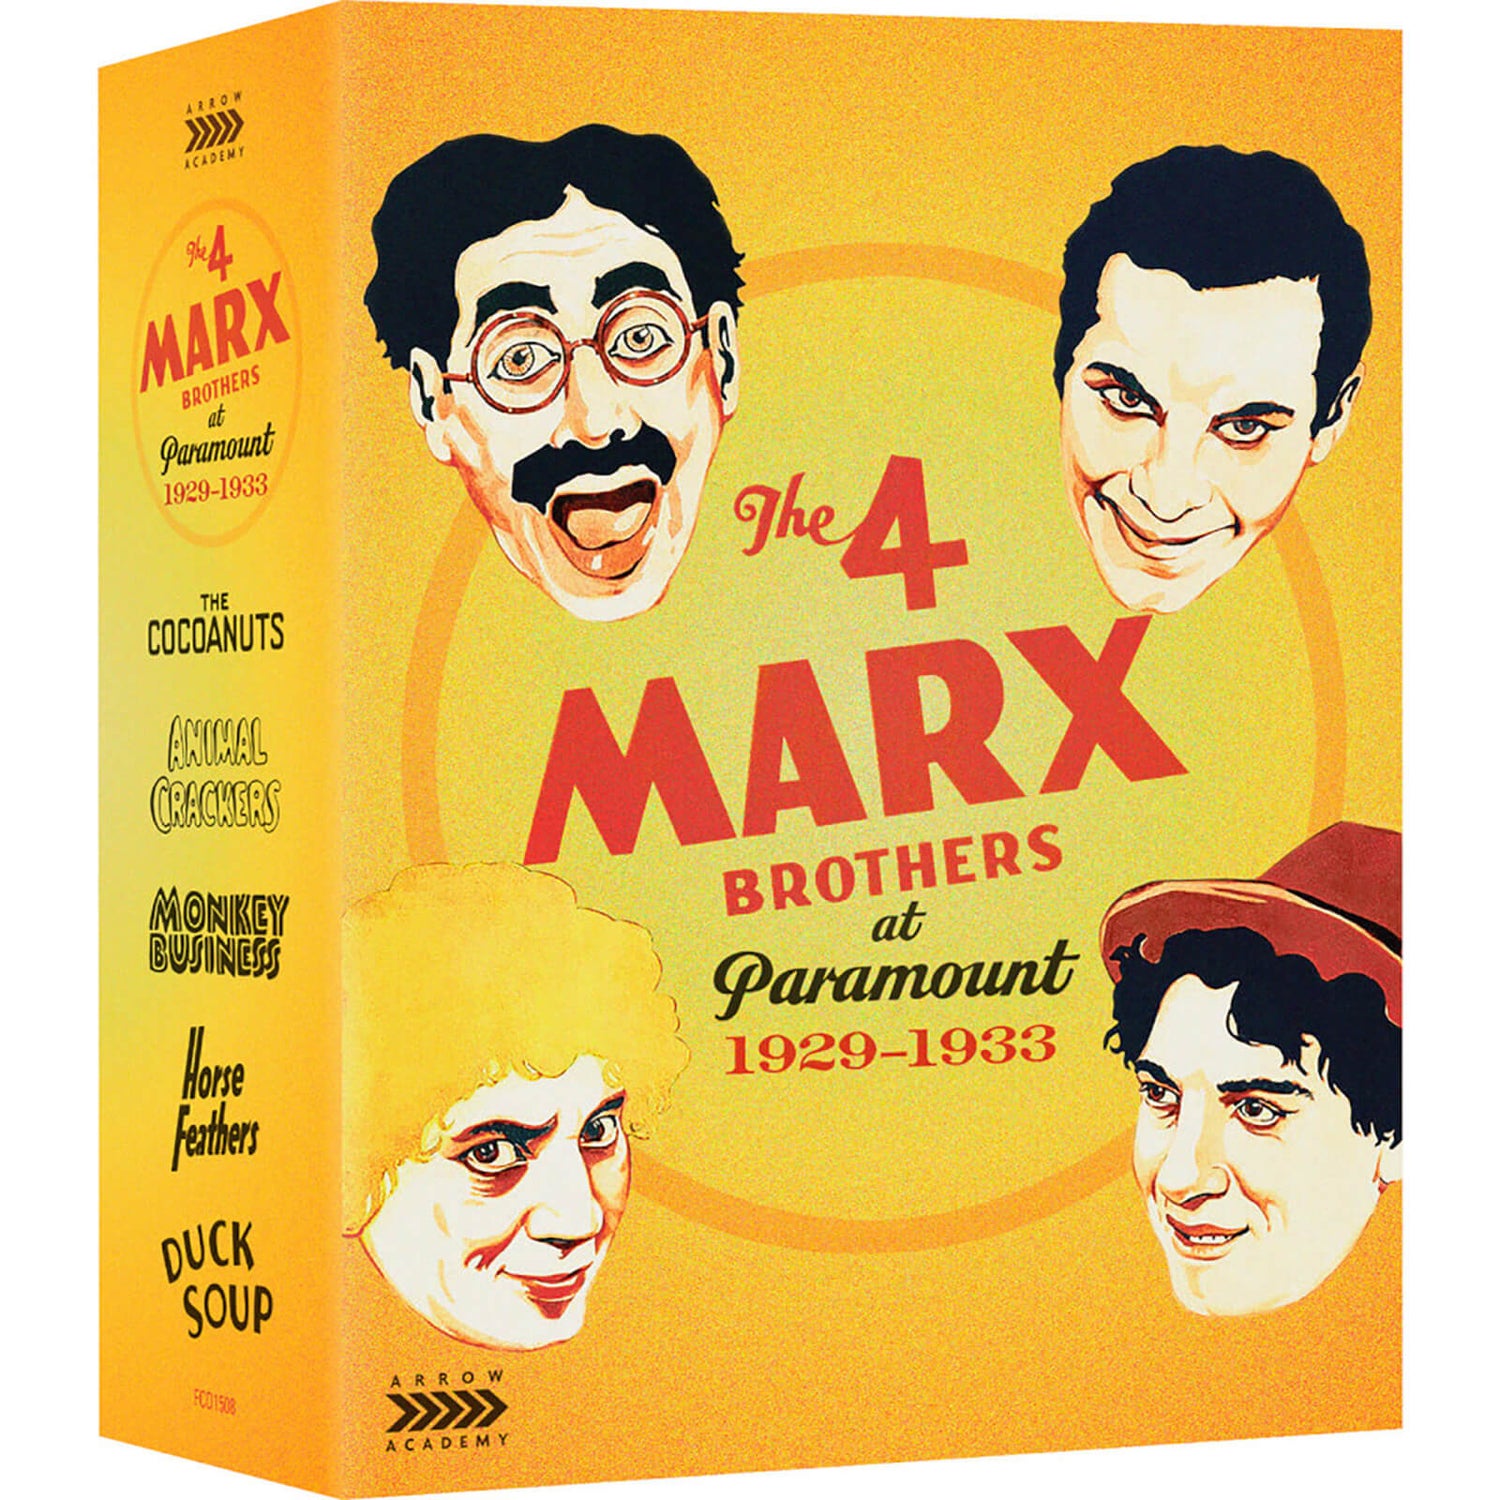 The 4 Marx Brothers At Paramount 1929 - 1933